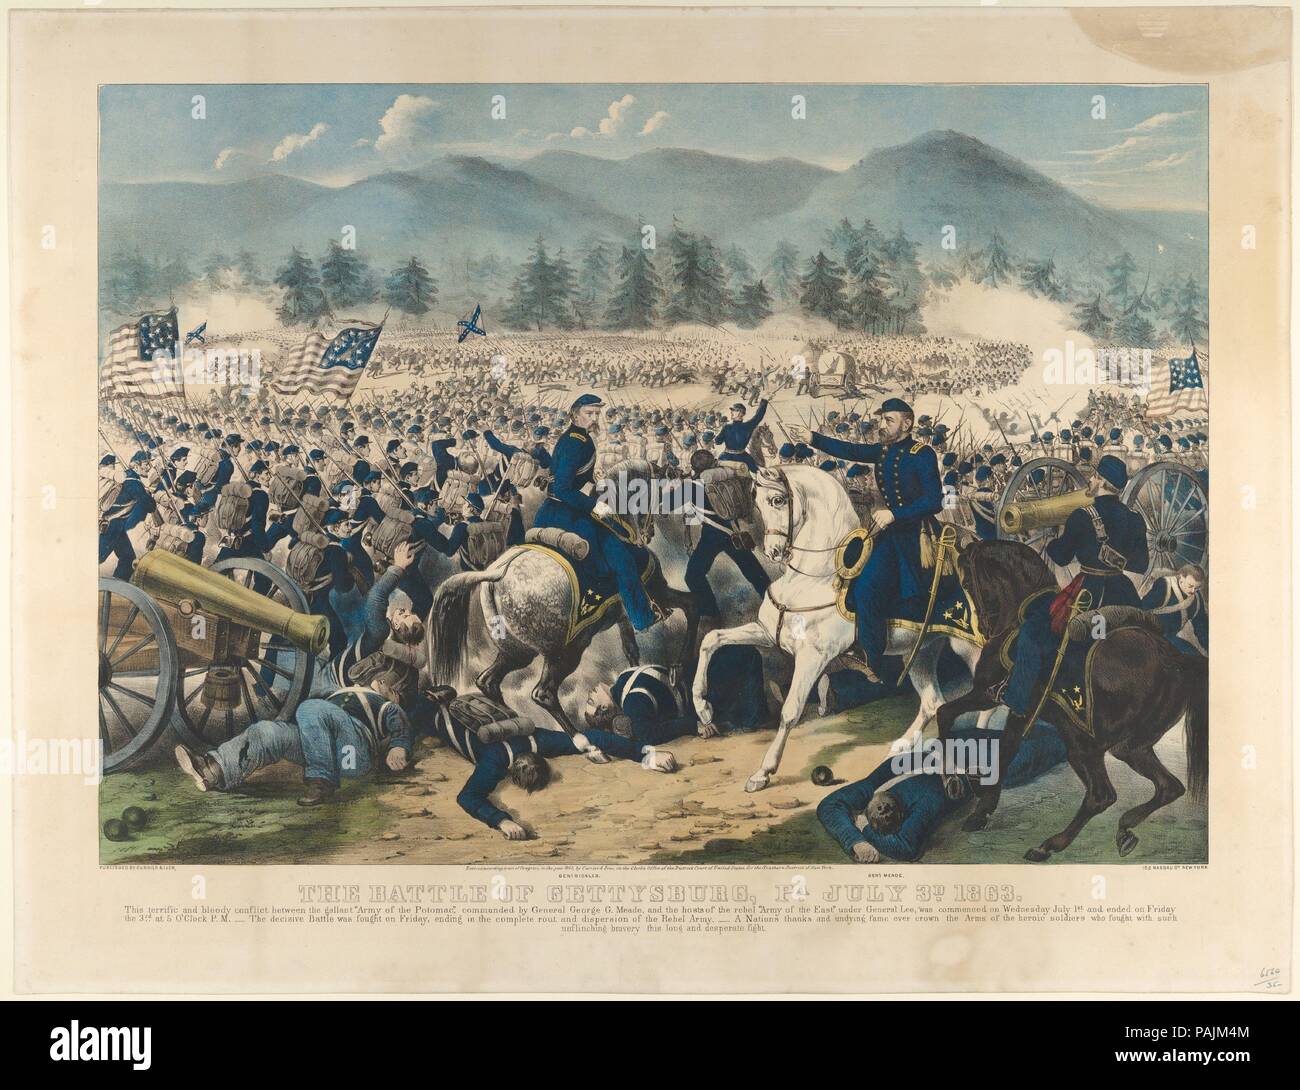 The Battle of Gettysburg, Pa., July 3rd, 1863. Dimensions: Image: 15 11/16 x 22 3/8 in. (39.8 x 56.8 cm)  Sheet: 19 13/16 × 25 13/16 in. (50.3 × 65.6 cm). Publisher: Currier & Ives (American, active New York, 1857-1907). Date: 1863.  The New York lithographer-publisher Currier & Ives issued this print soon after the Battle of Gettysburg to commemorate the dearly won Union victory. The text below the image sets the tone:  This terrific and bloody conflict between the gallant Army of the Potomac, commanded by their great General George G. Meade, and the hosts of the rebel Army of the East under  Stock Photo